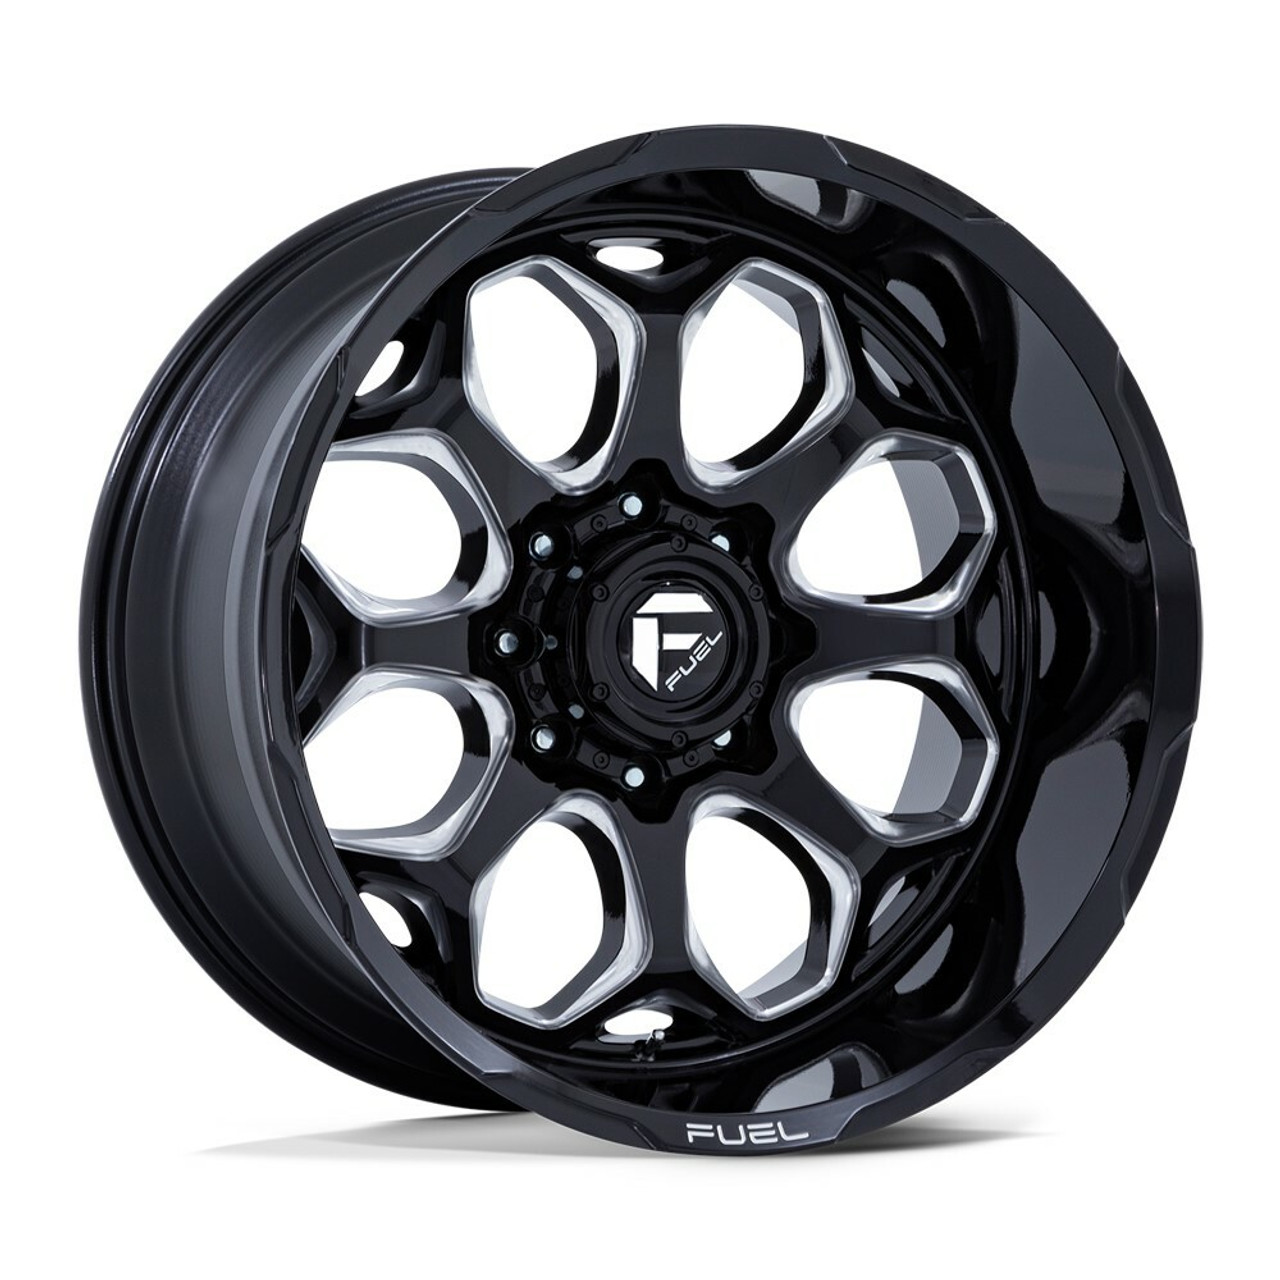 Set 4 Fuel FC862 Scepter 20x10 8x6.5 Gloss Black Milled 20" -18mm Lifted Wheels